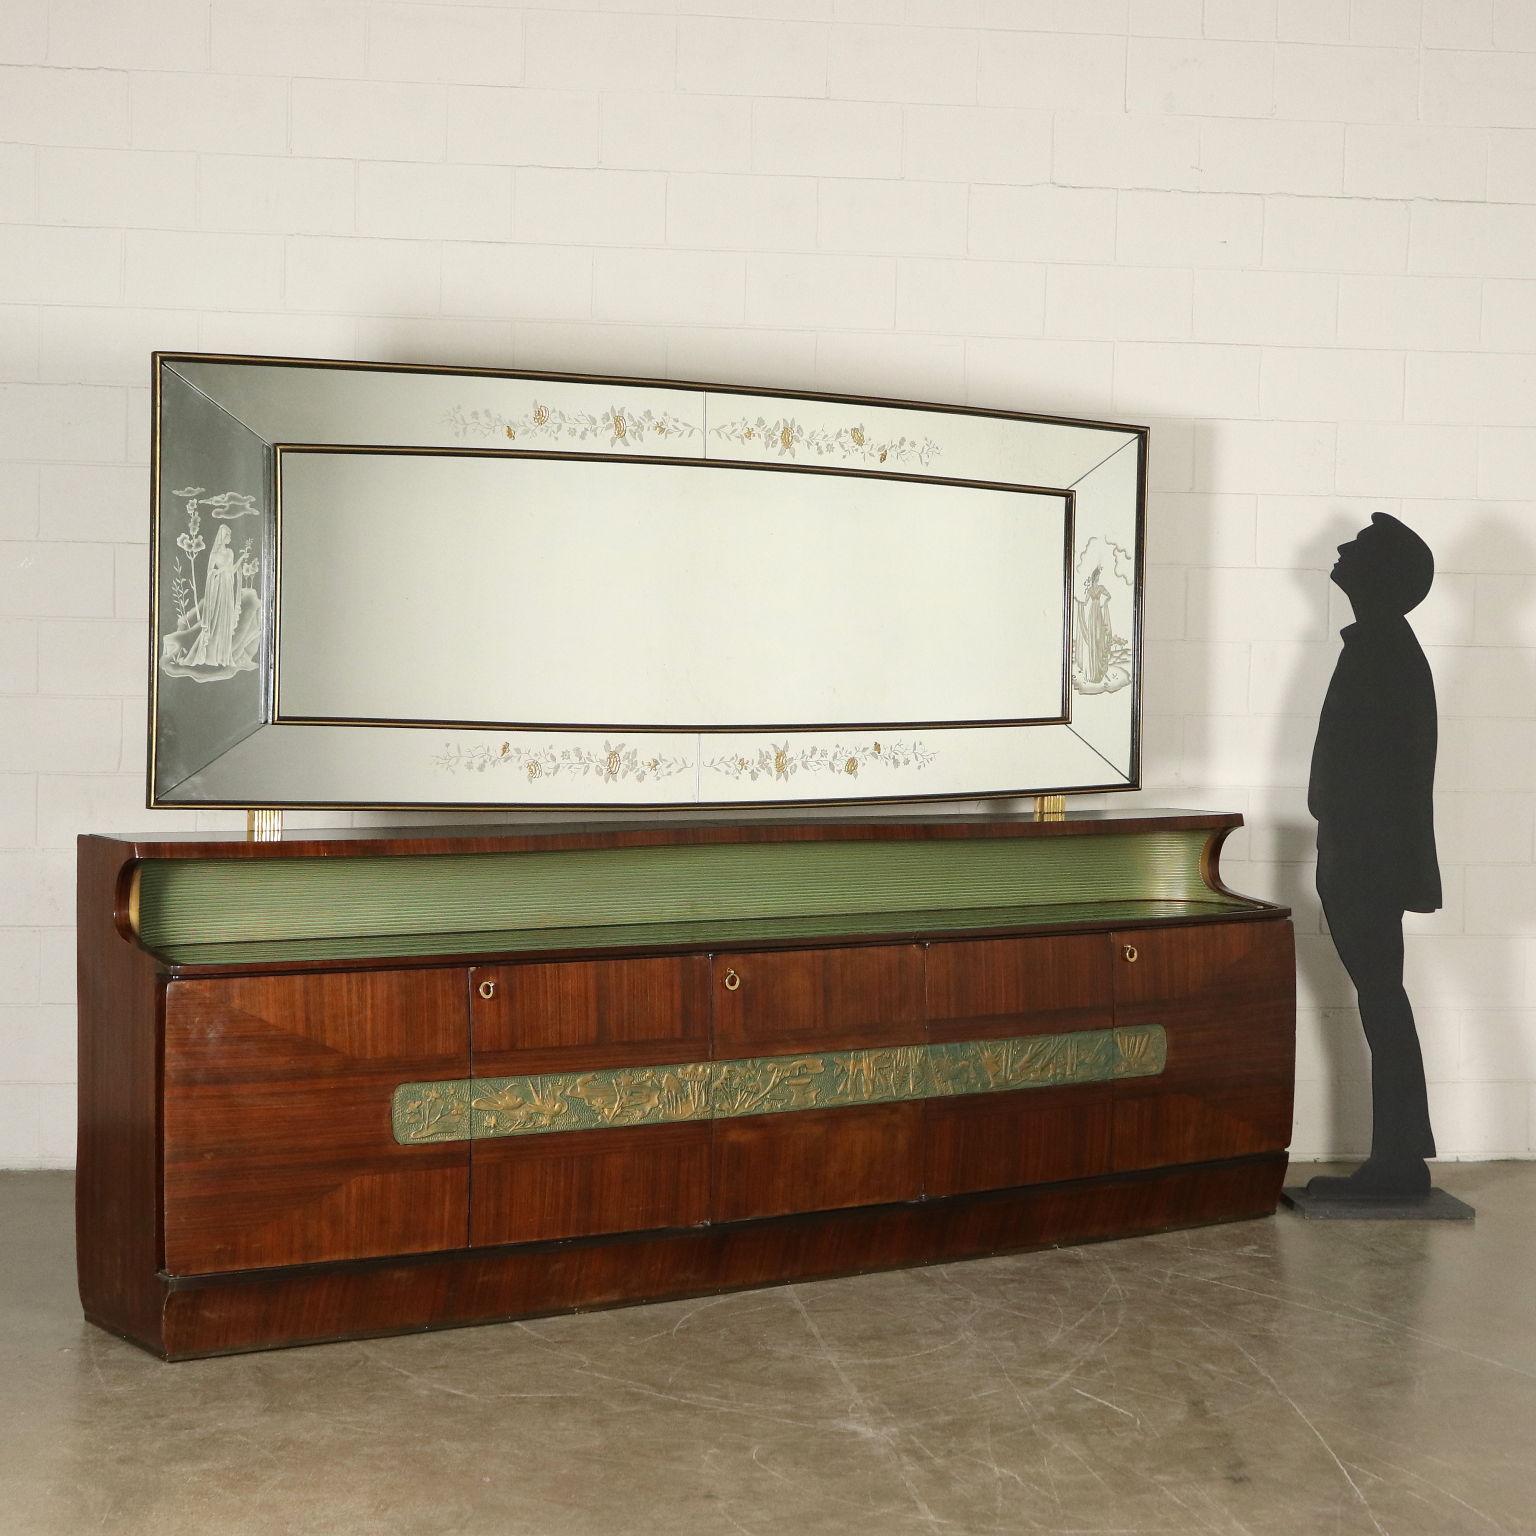 Buffet with mirror designed for Consorzio Esposizione Mobili Cantù. Wood veneer, ornaments made of lacquered carved wood, glass top. Manufactured in Italy, 1950s.